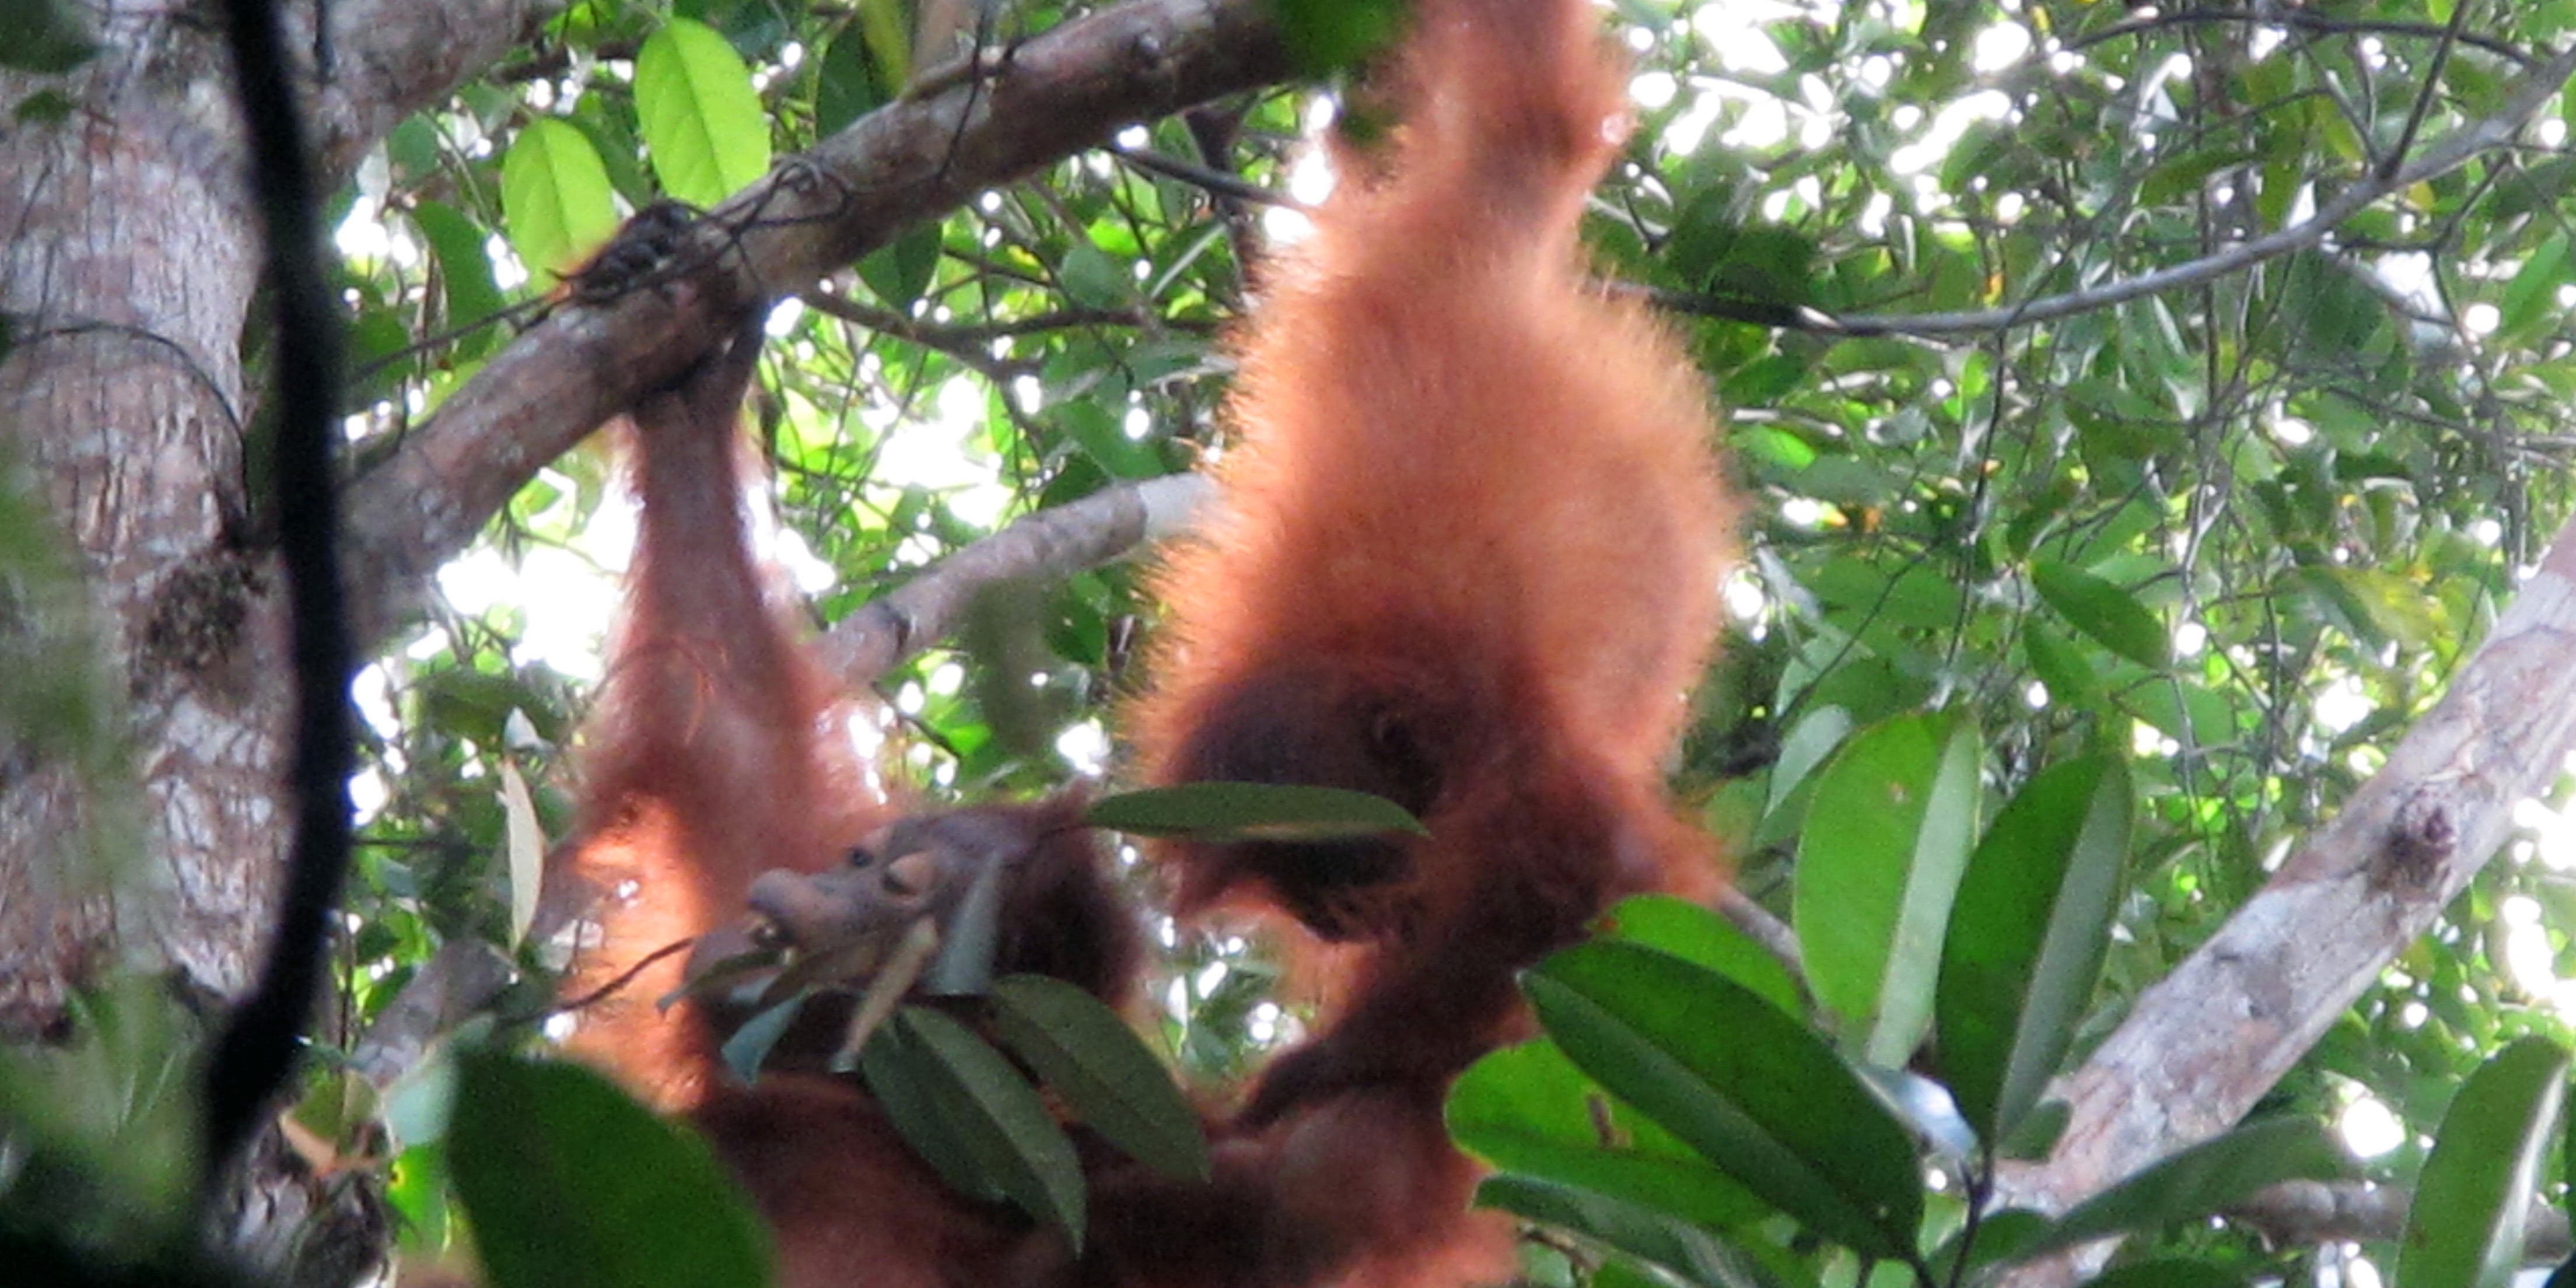 Primate Diary: Observing Orangutans in the Wild | Smithsonian's National Zoo